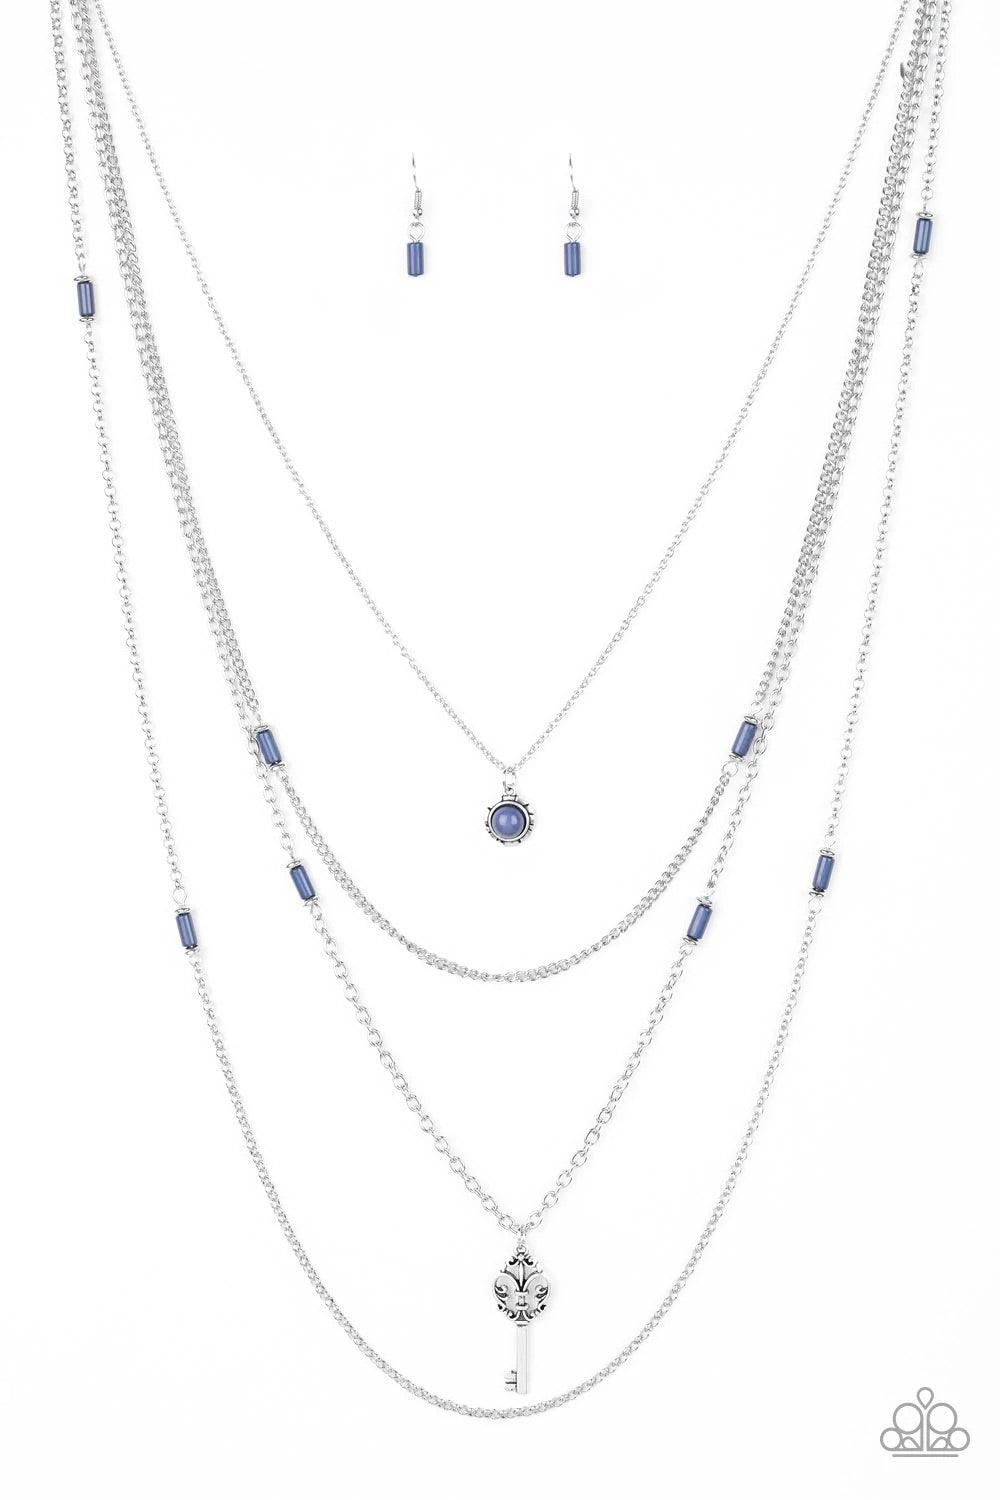 Paparazzi Accessories Key Keynote - Blue Featuring shiny blue and dainty silver accents, a blue beaded pendant gives way to a shimmery silver key for a whimsically layered look. Features an adjustable clasp closure. Sold as one individual necklace. Includ